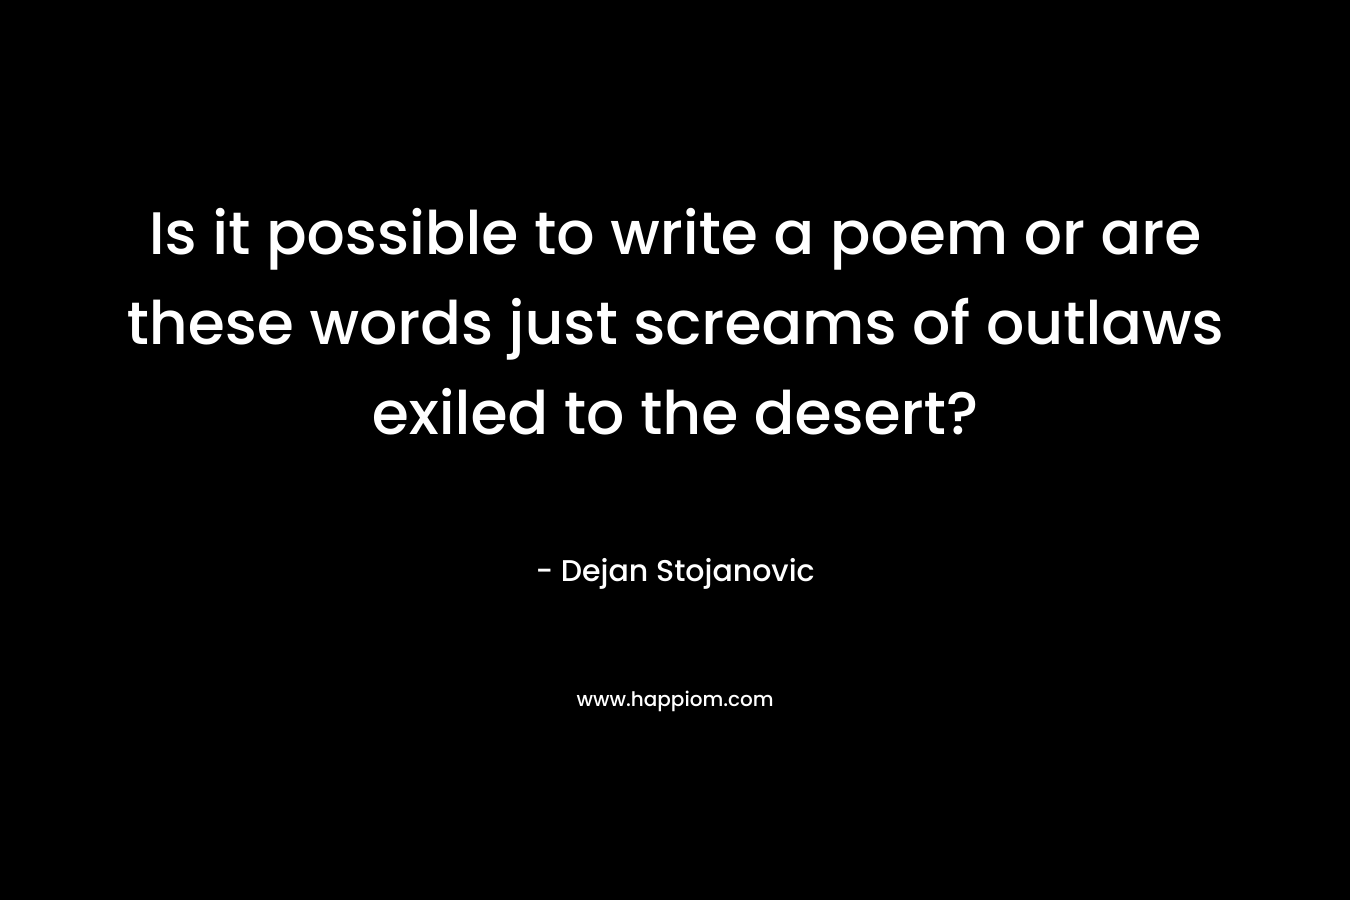 Is it possible to write a poem or are these words just screams of outlaws exiled to the desert?